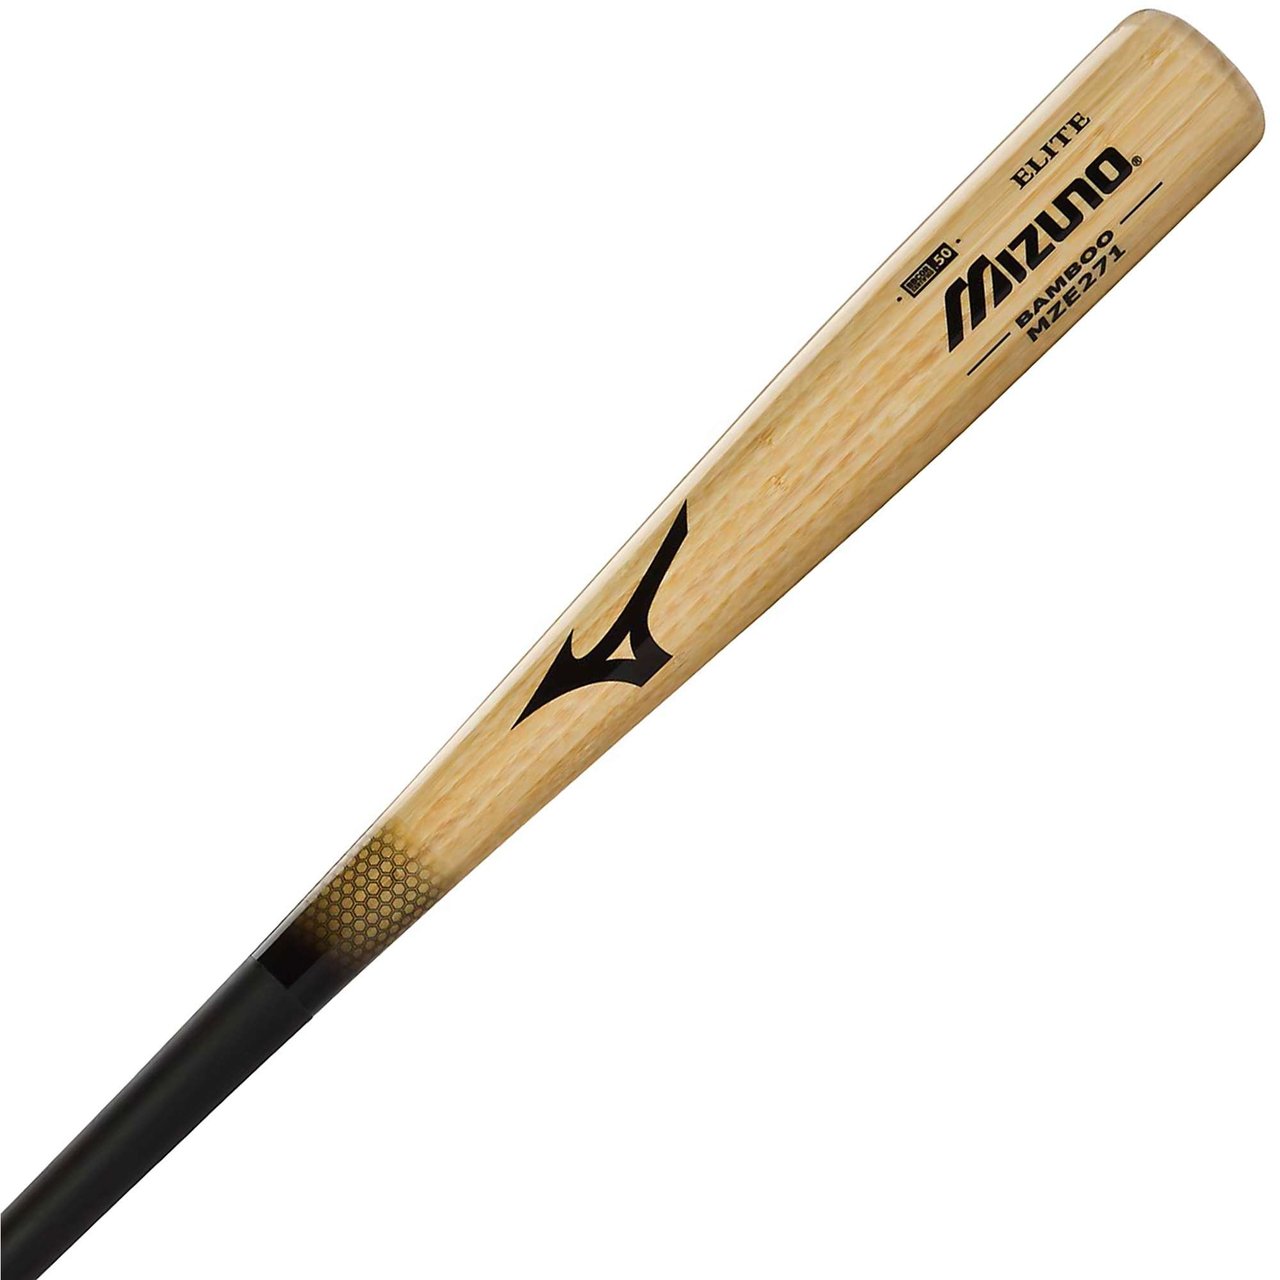 US Patent Pending Design. 120 Day Manufacturer's Warranty. Bamboo and Glass fiber is melded together in the handle and taper of the bat while combined with the bamboo barrel for superior durability. Over 30 years of expertise in engineering of Bamboo bats. BBCOR Certified. Sanded handle for improved grip.